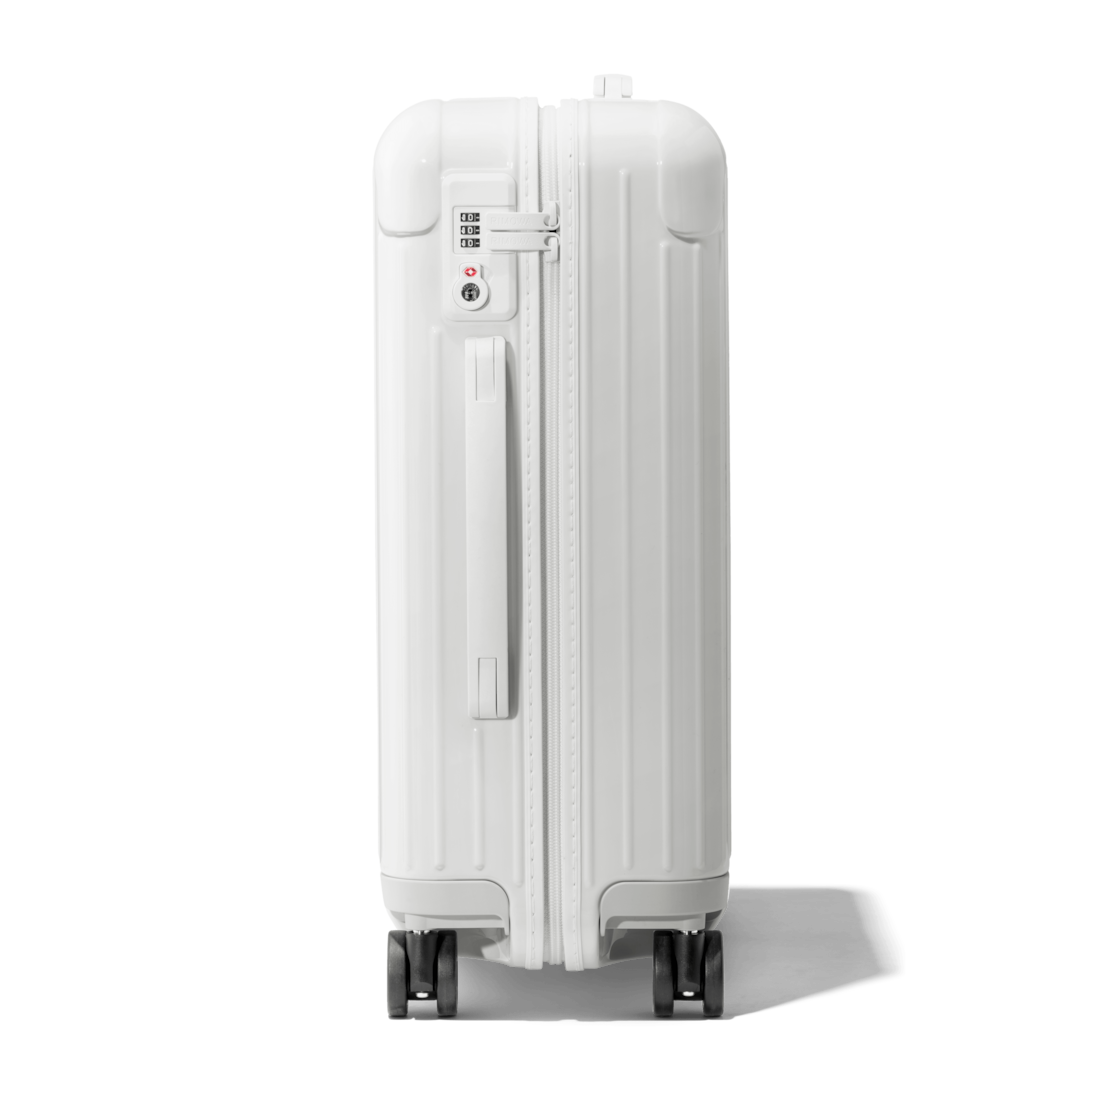 Essential Cabin S Lightweight Carry-On Suitcase | gloss white | RIMOWA